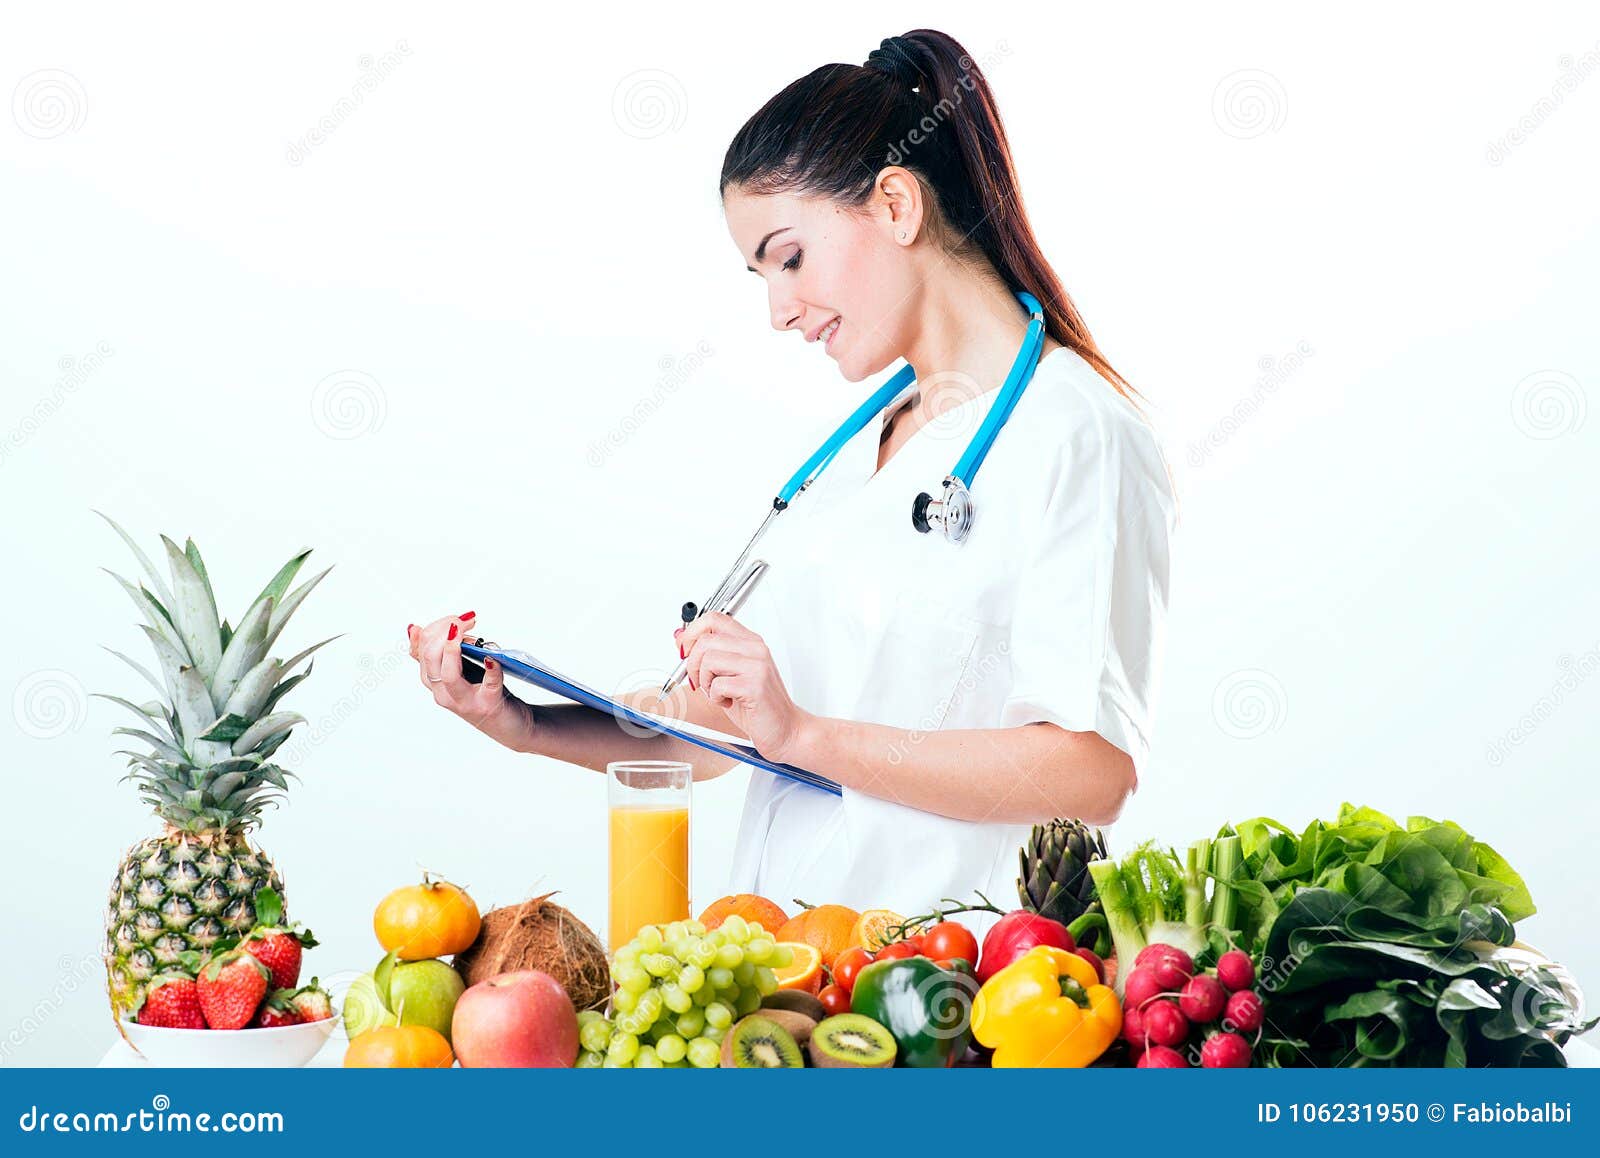 Female dietitian in uniform with stethoscope on a desk with vegetables and fruits